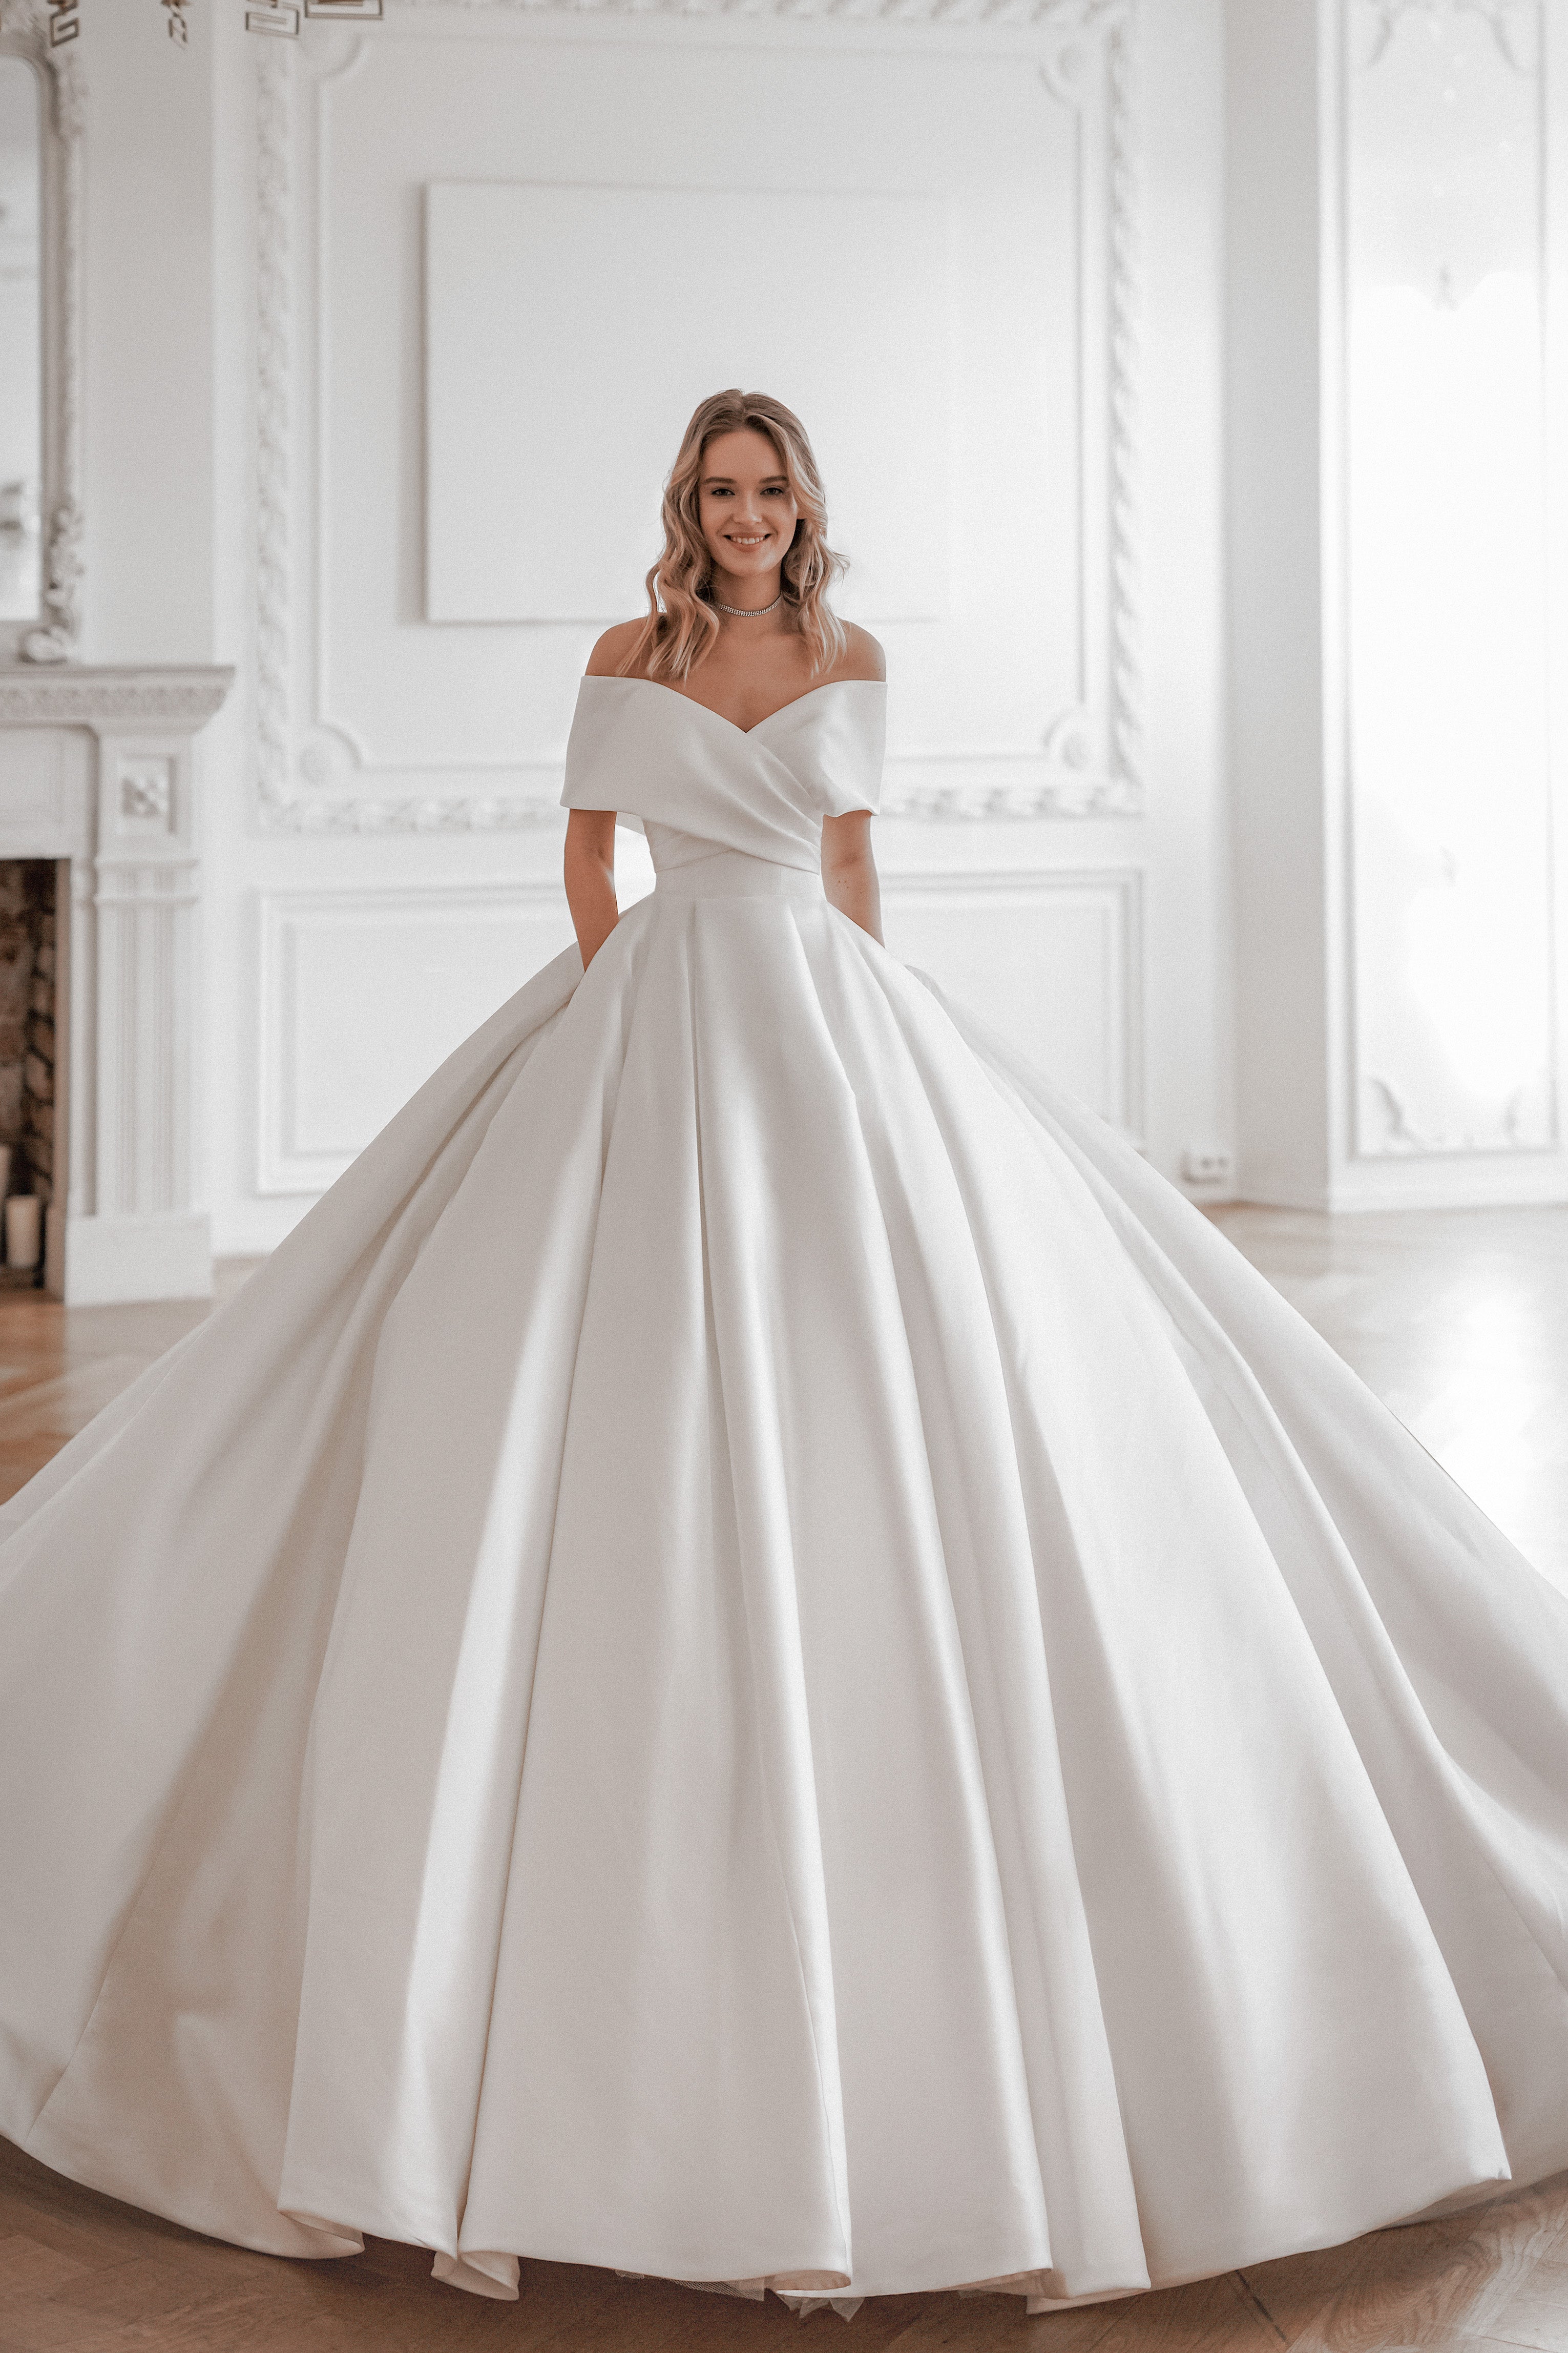 4 Reasons to Dream about Eddy K Bridal at All Brides Beautiful